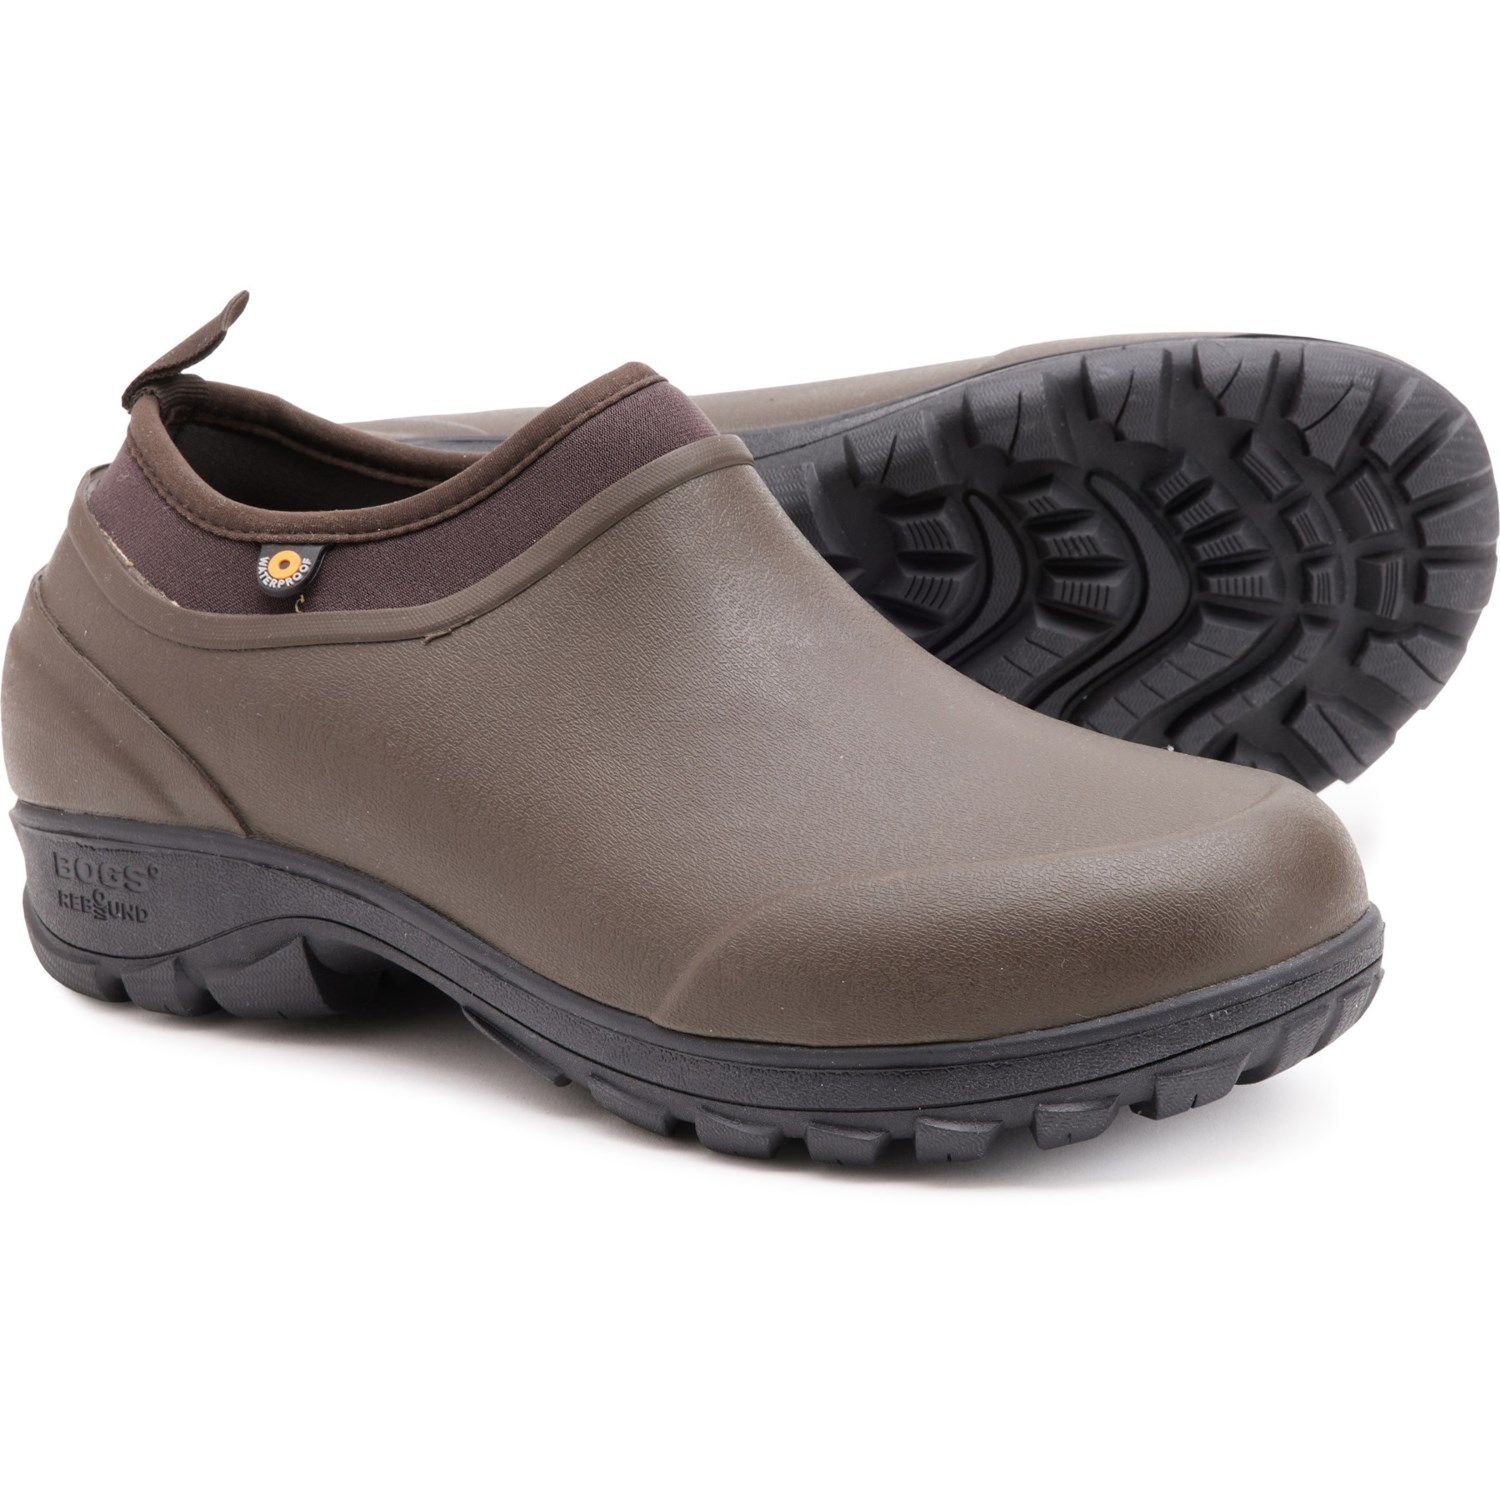 Bogs Footwear Sauvie Shoes (For Men) - Save 33%